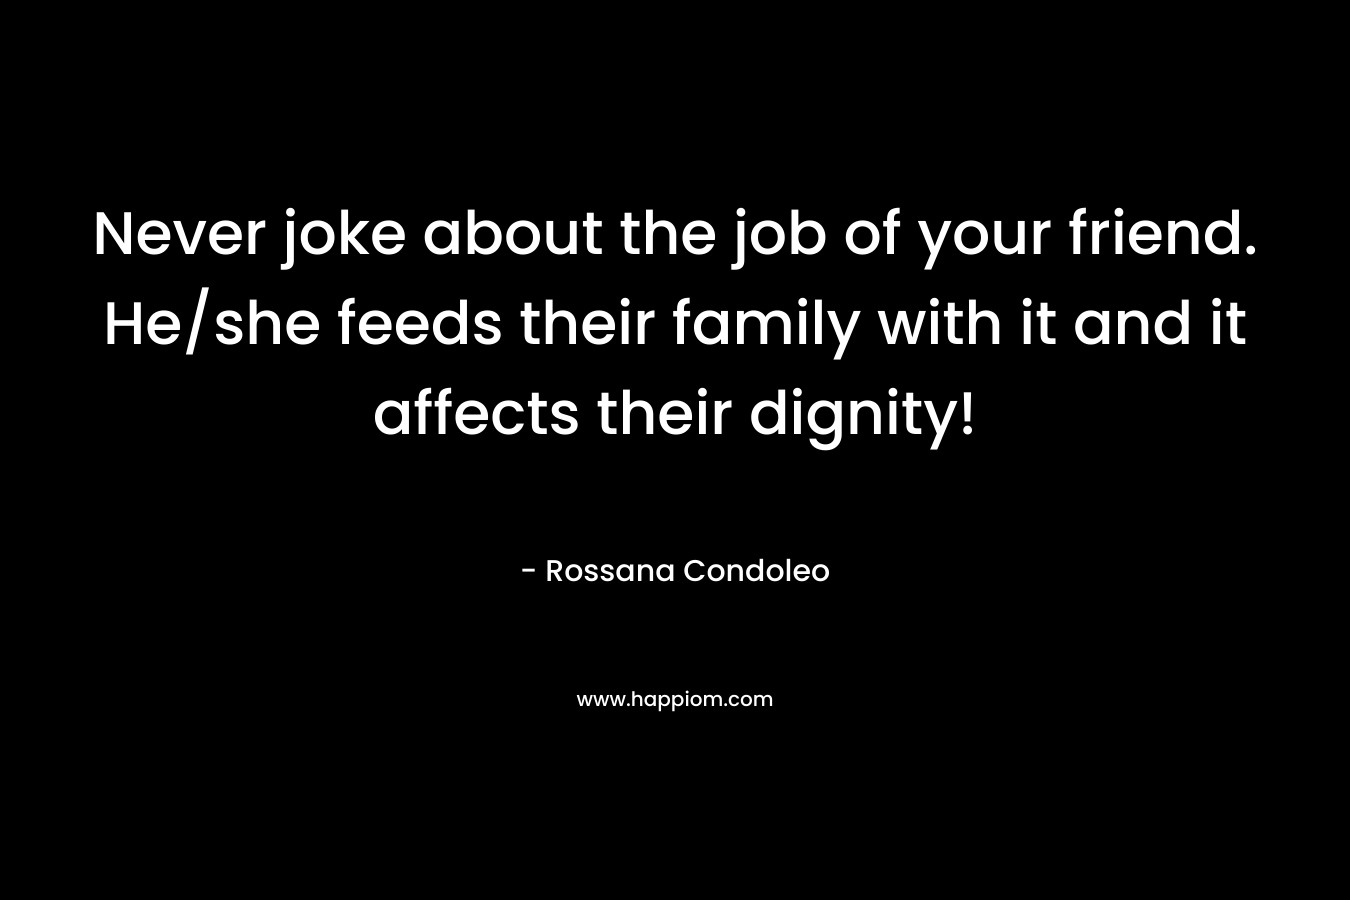 Never joke about the job of your friend. He/she feeds their family with it and it affects their dignity! – Rossana Condoleo